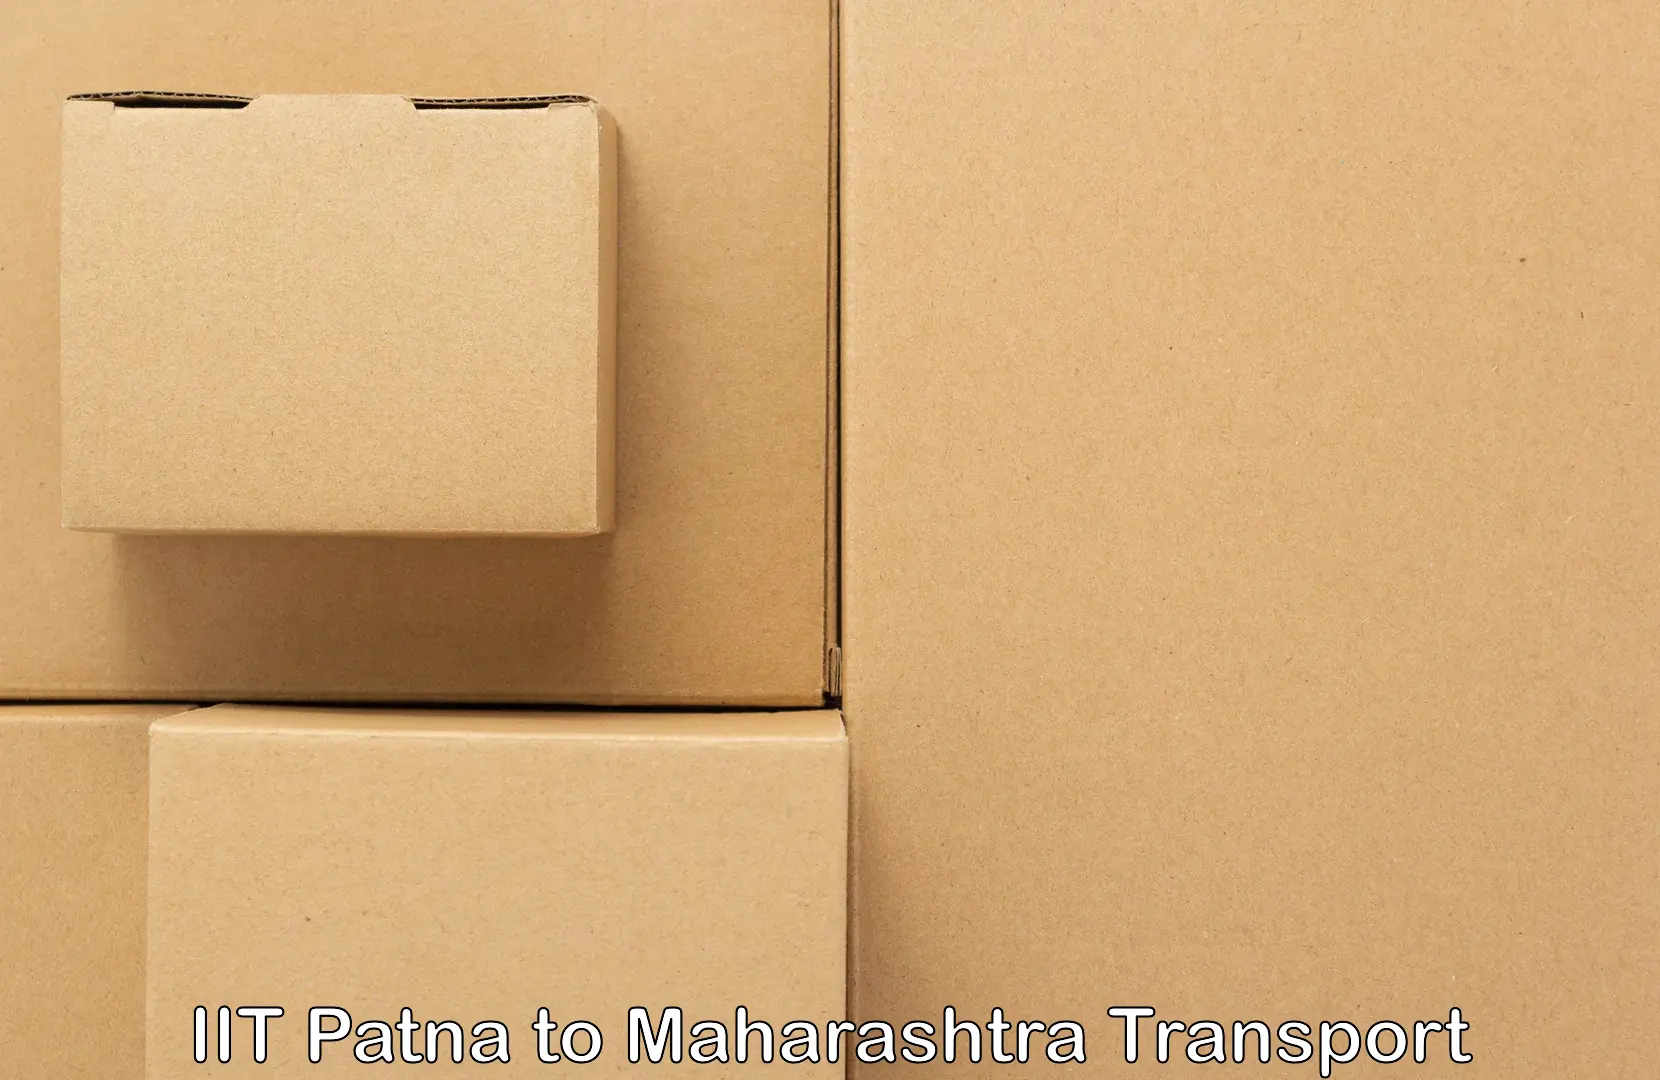 Transport bike from one state to another IIT Patna to Navi Mumbai